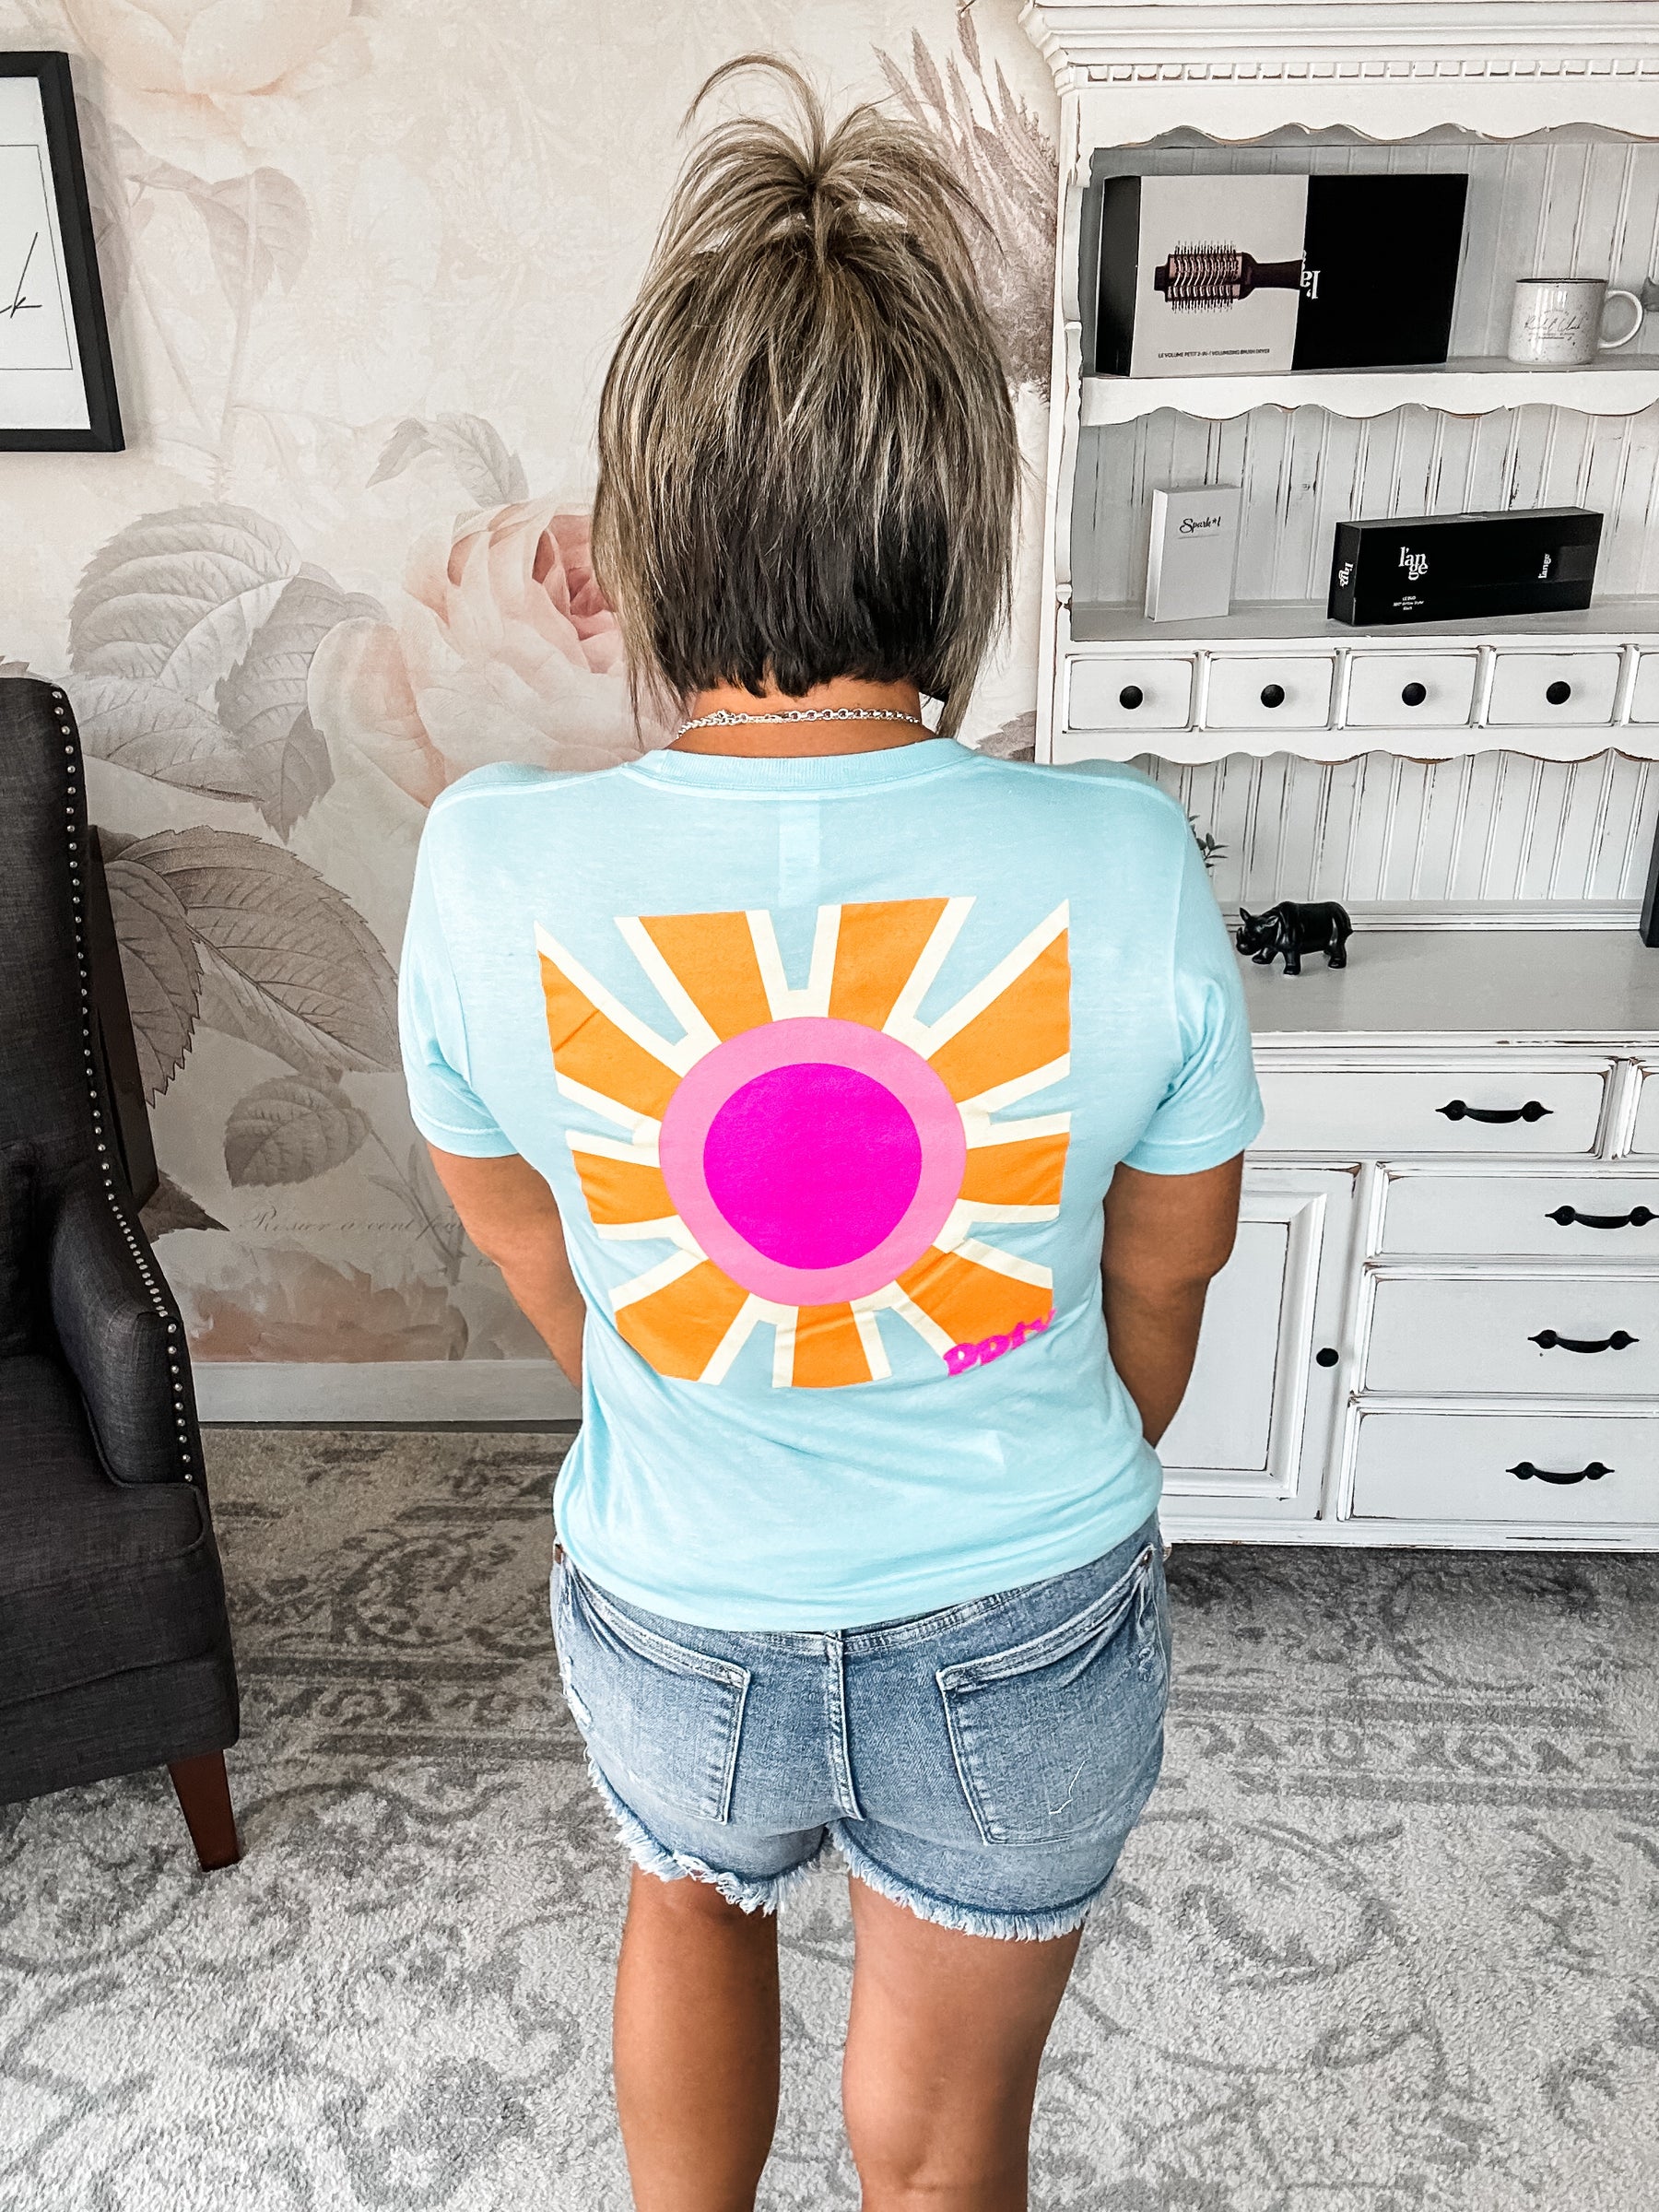 Let The Sunshine In Graphic Tee